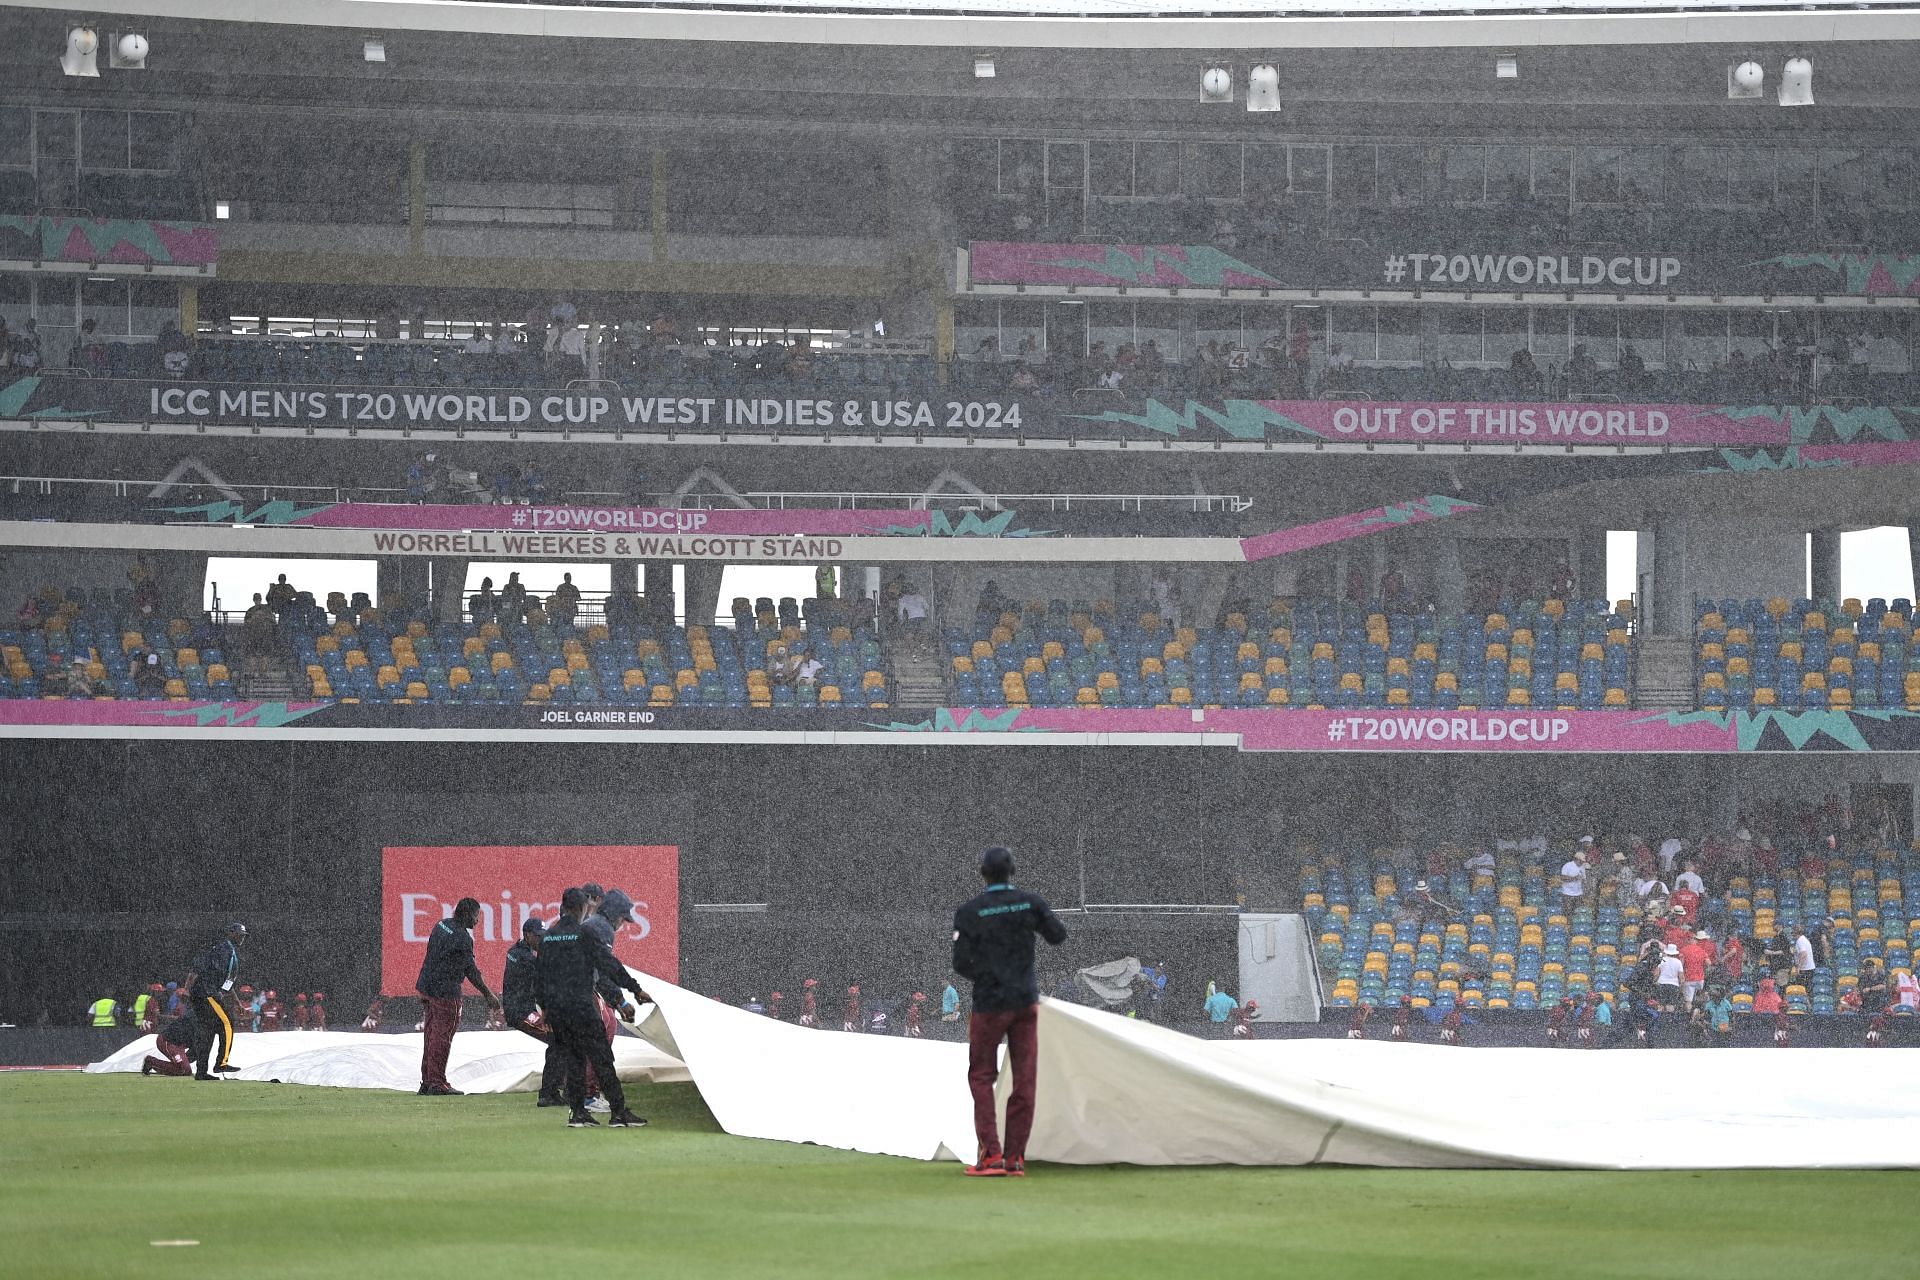 Barbados weather watch: Rain threat looms over India vs South Africa 2024 T20 World Cup final